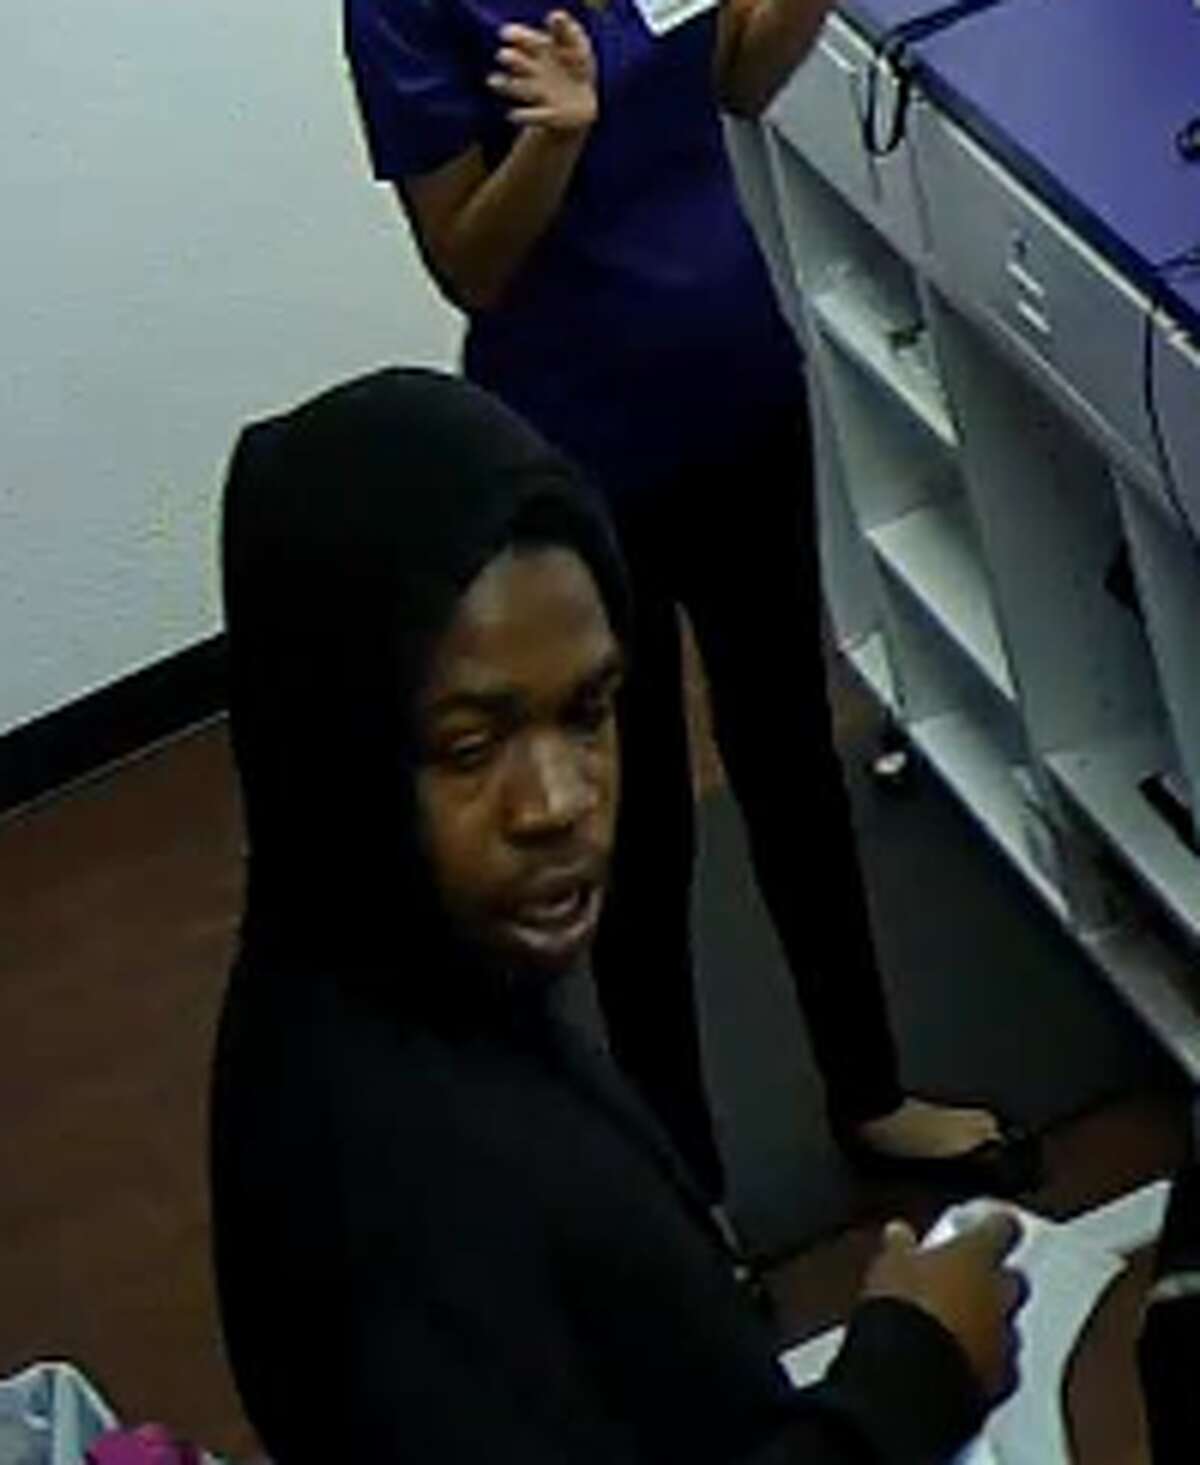 The San Antonio Police Department is asking for assistance in identifying the suspects pictured in these photos. They are wanted for a robbery at the Metro PCS located at 5602 US Hwy. 87 E. on June 7, 2016.